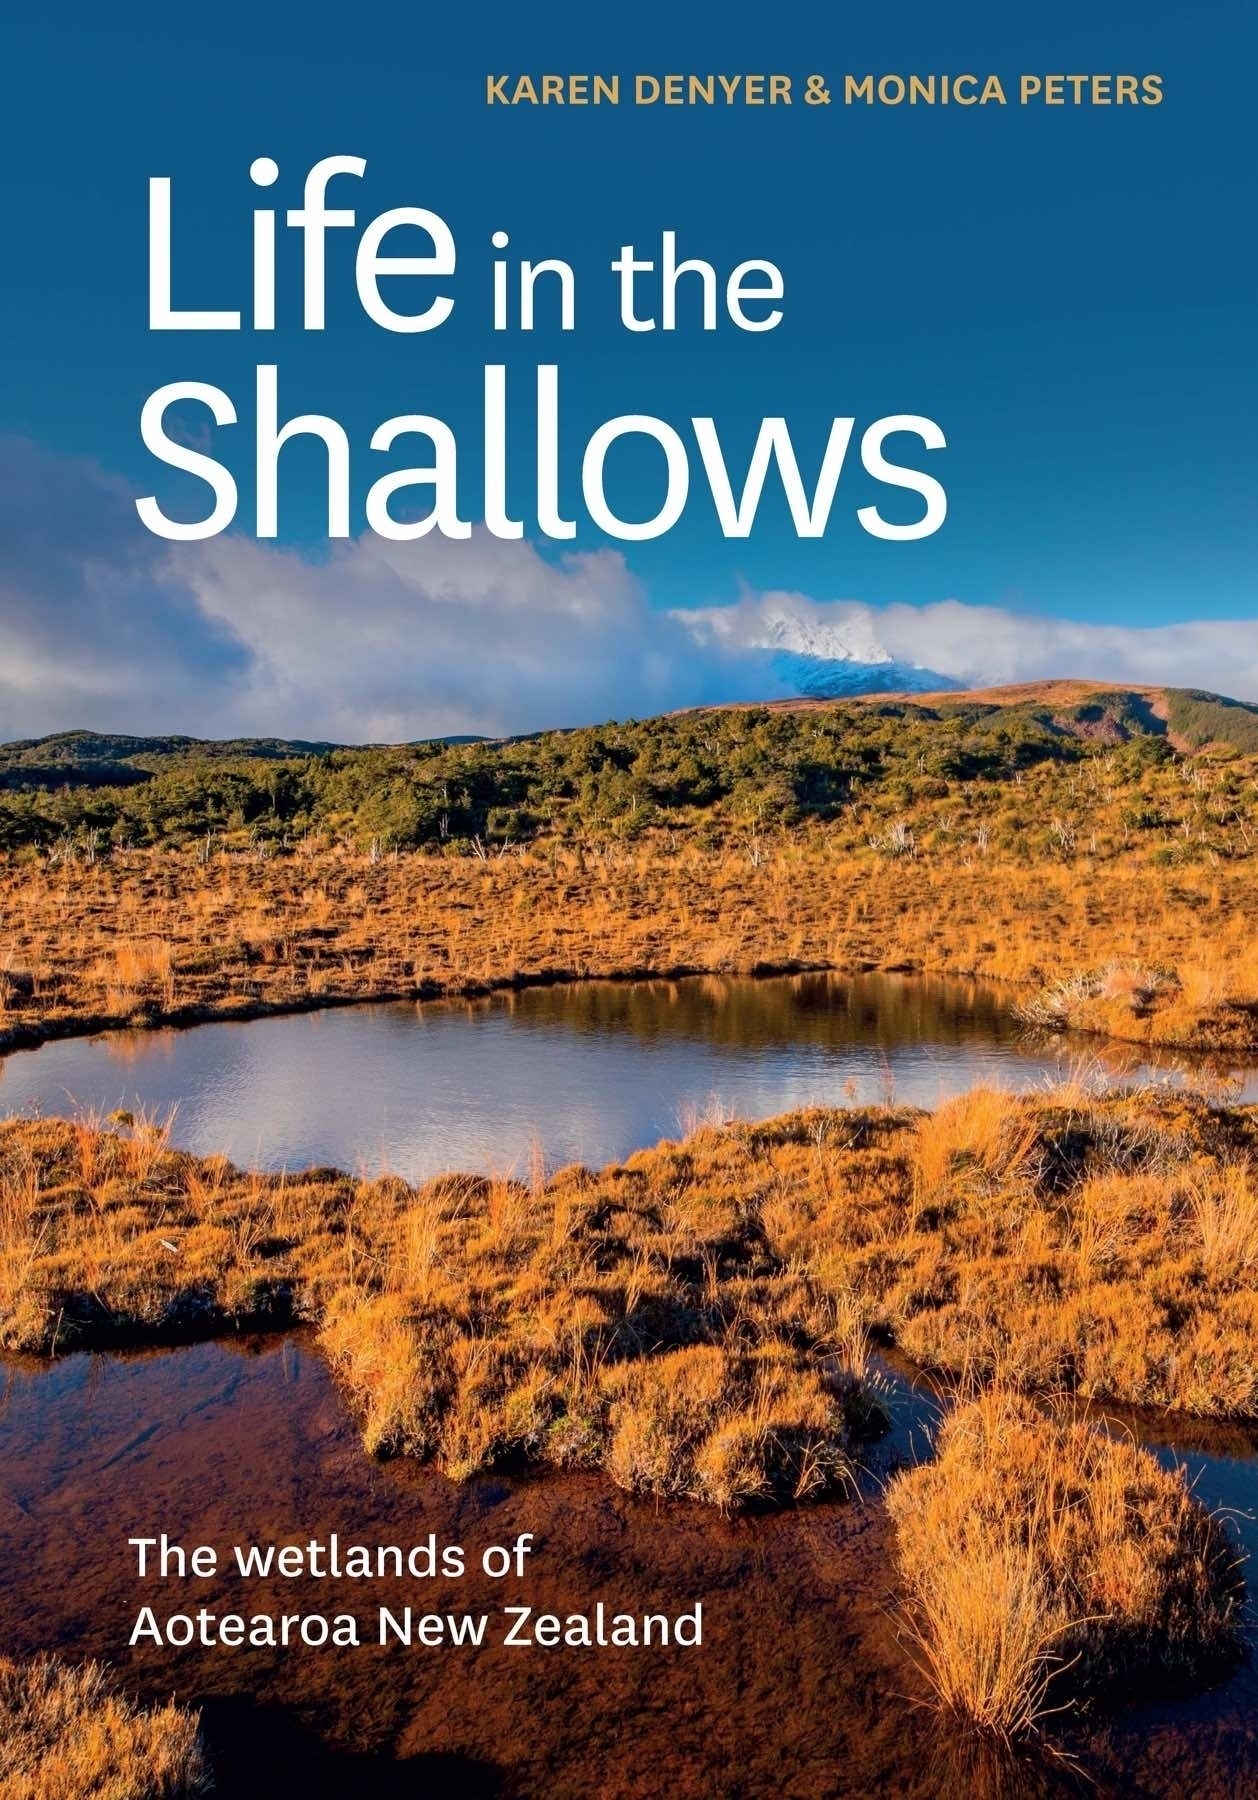 Book cover: Life in the Shallows The wetlands of Aotearoa New Zealand. 